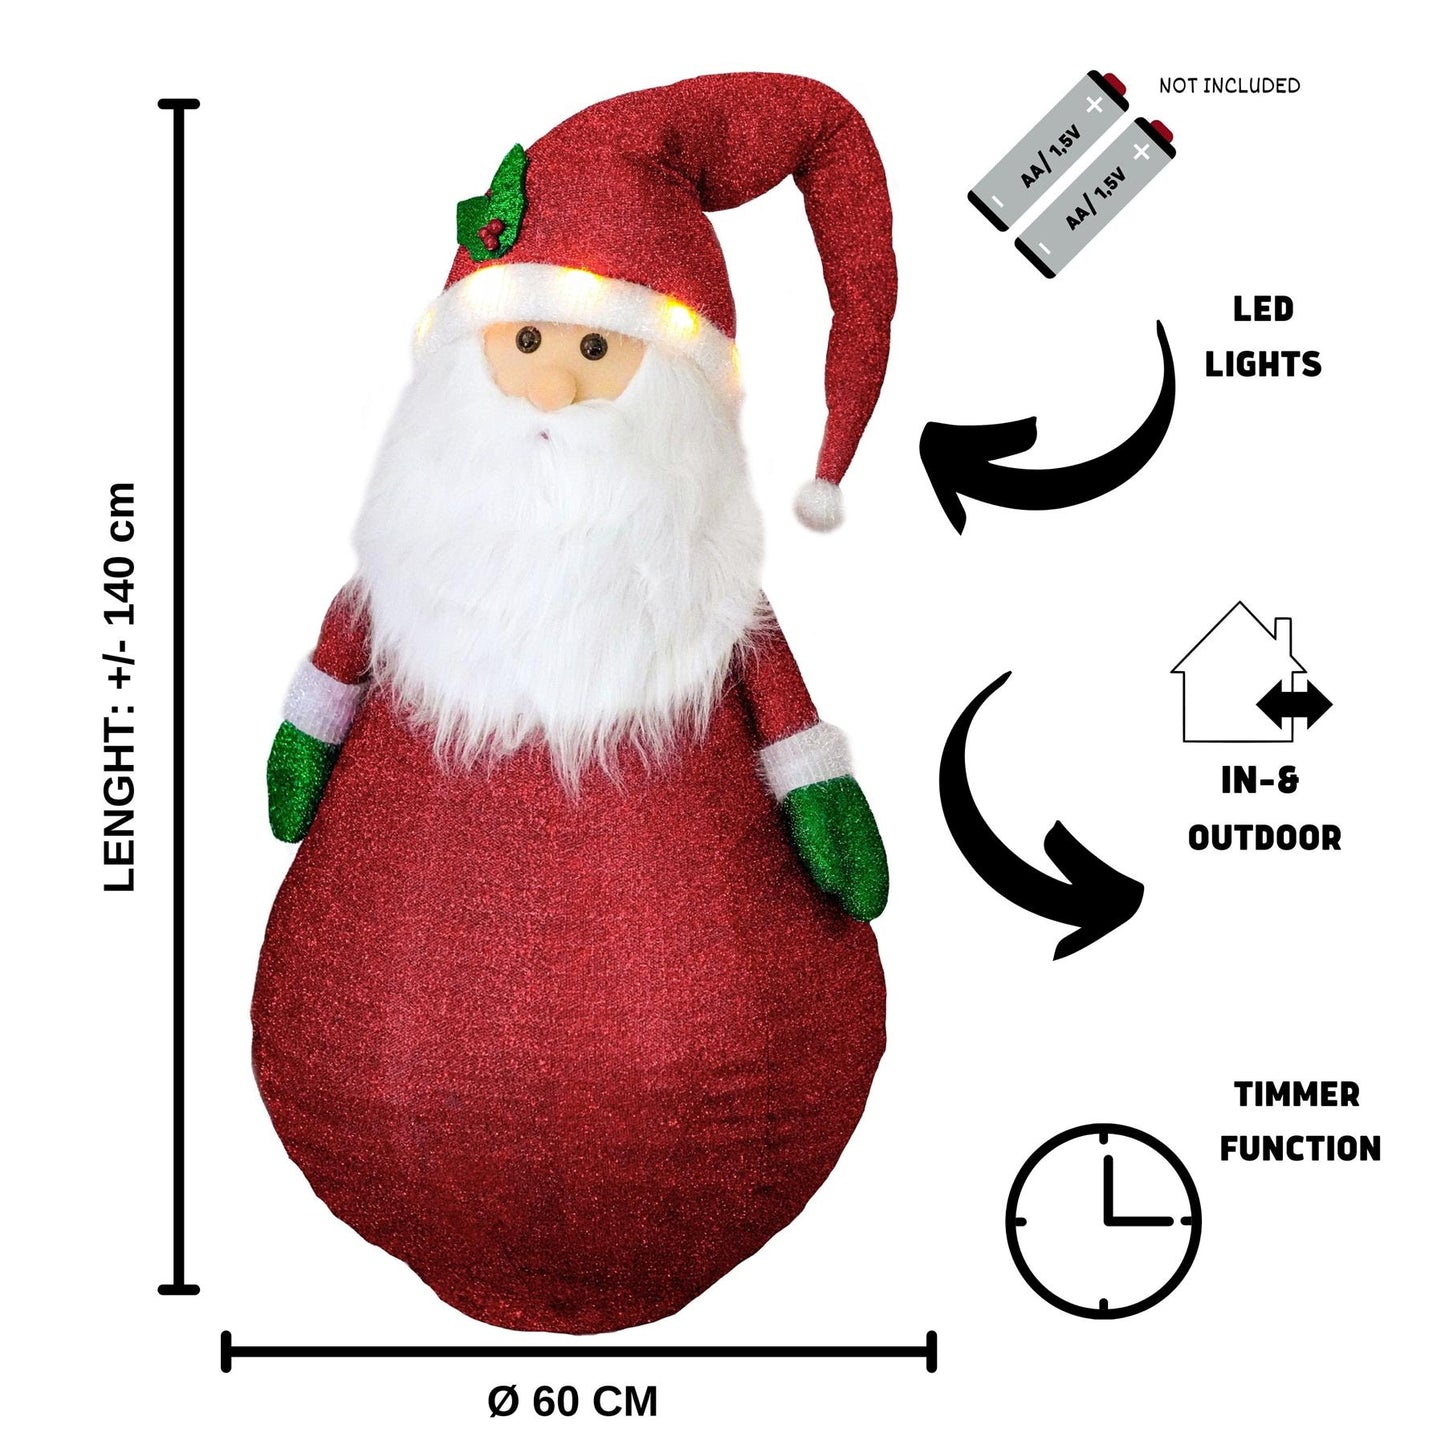 Collapsible Santa Christmas Decoration with LED lights by The Magic Toy Shop - UKBuyZone